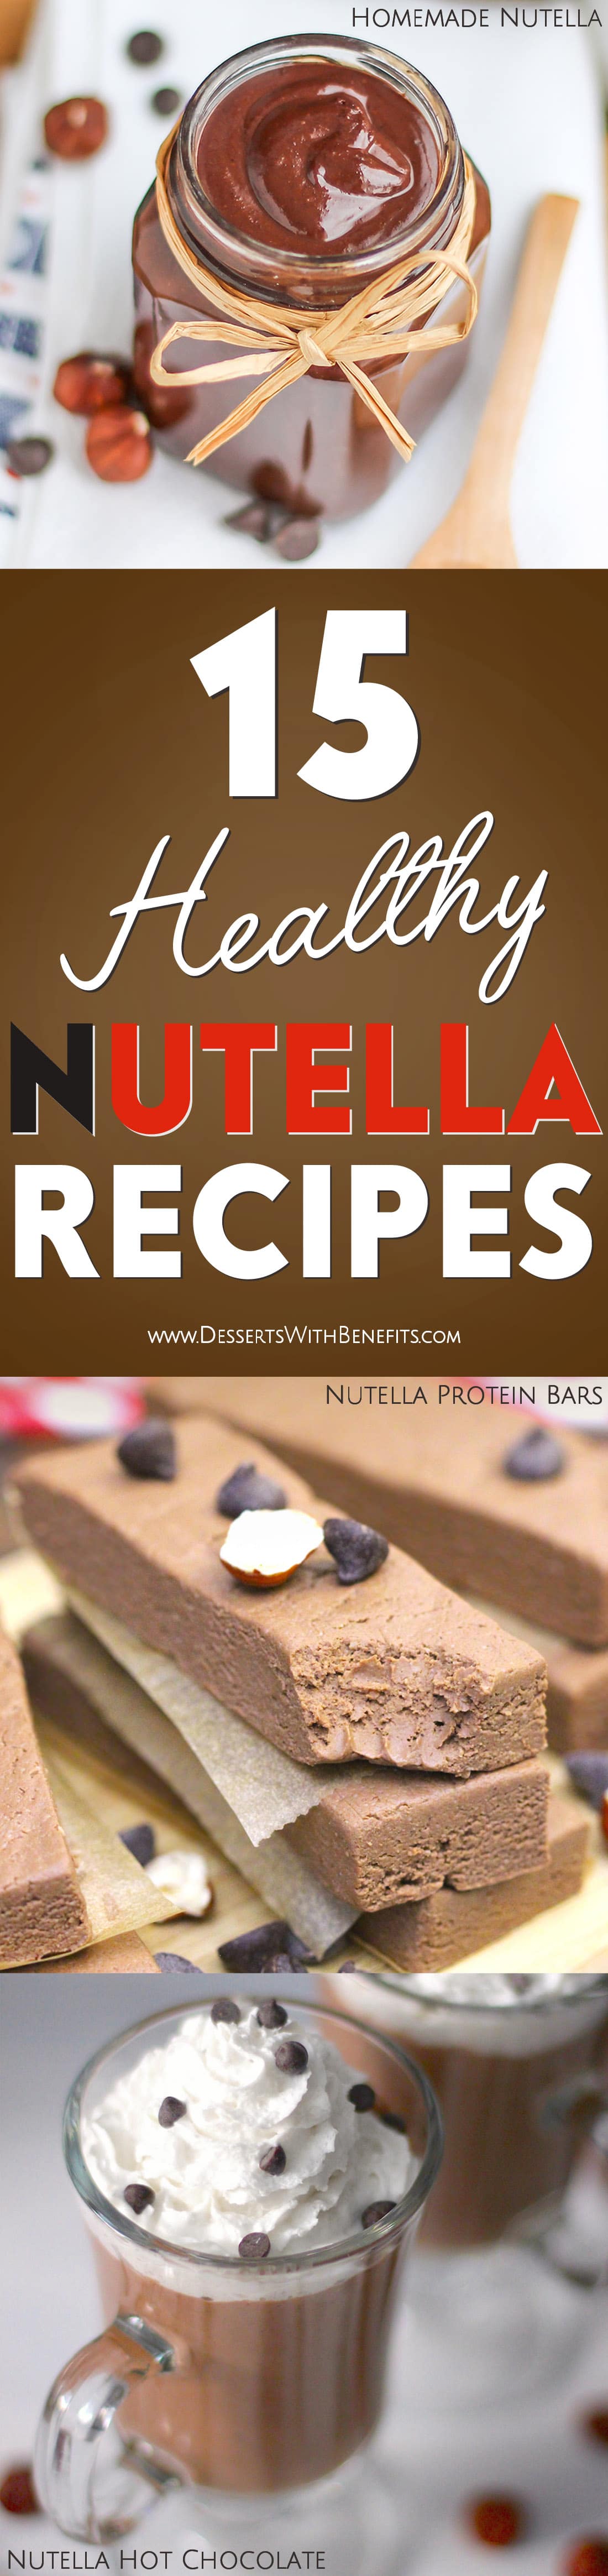 15 Healthy Nutella Recipes! Indulge in all that sweet chocolate-hazelnut flavor but without all the excess calories, refined sugar, palm oil, and artificial ingredients. From Nutella Fudge to Nutella Frozen Yogurt to Nutella Cookie Dough to Nutella Protein Bars, and more!